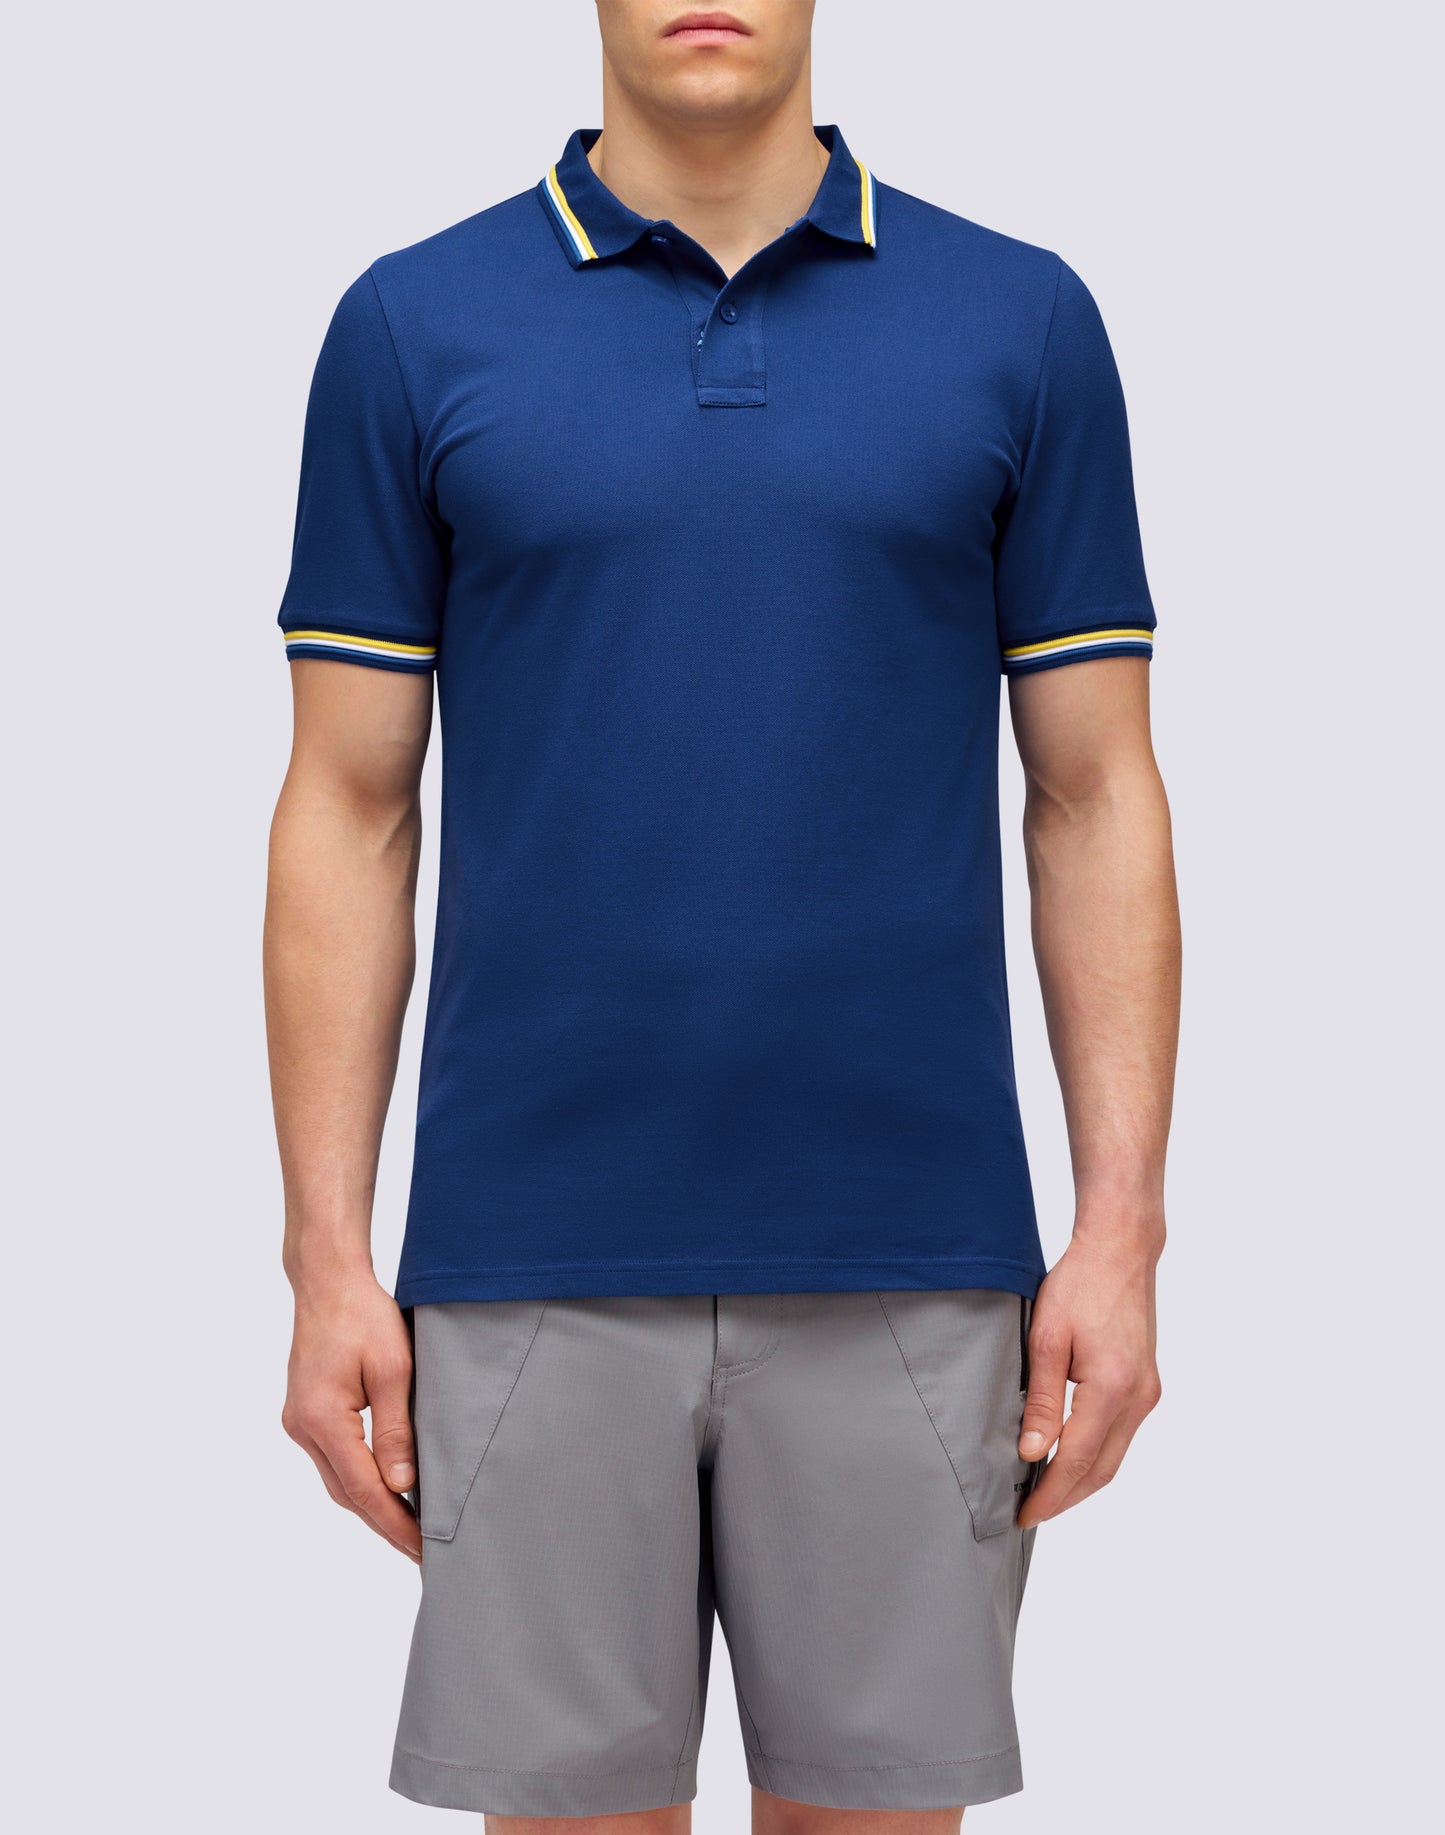 BRICE POLO SHIRT IN PIQUET COTTON WITH TRICOLOR DETAILS